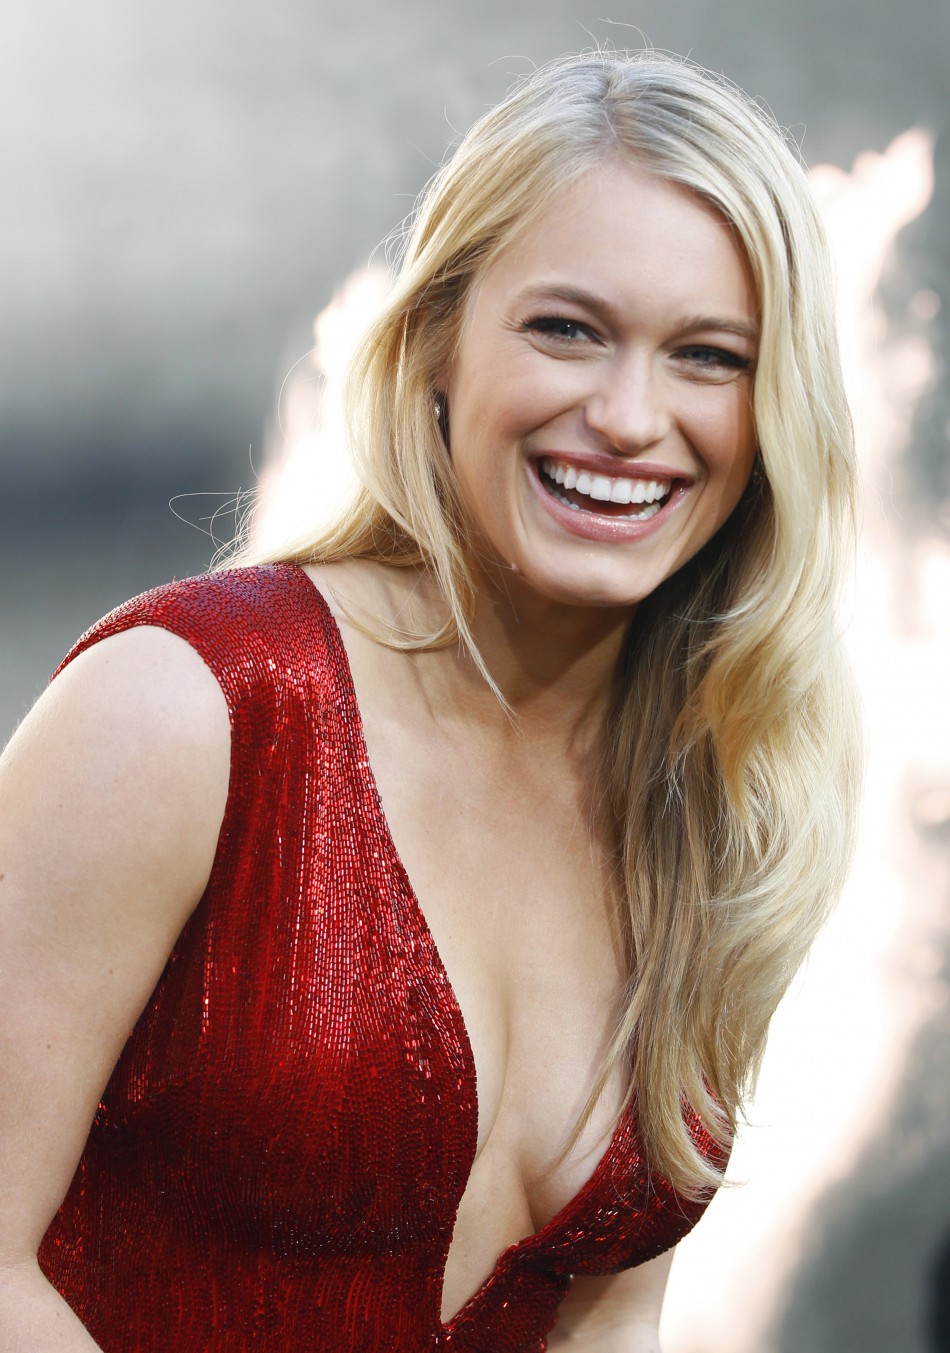 Cast member Leven Rambin poses at the premiere of quotThe Hunger Gamesquot in Los Angeles